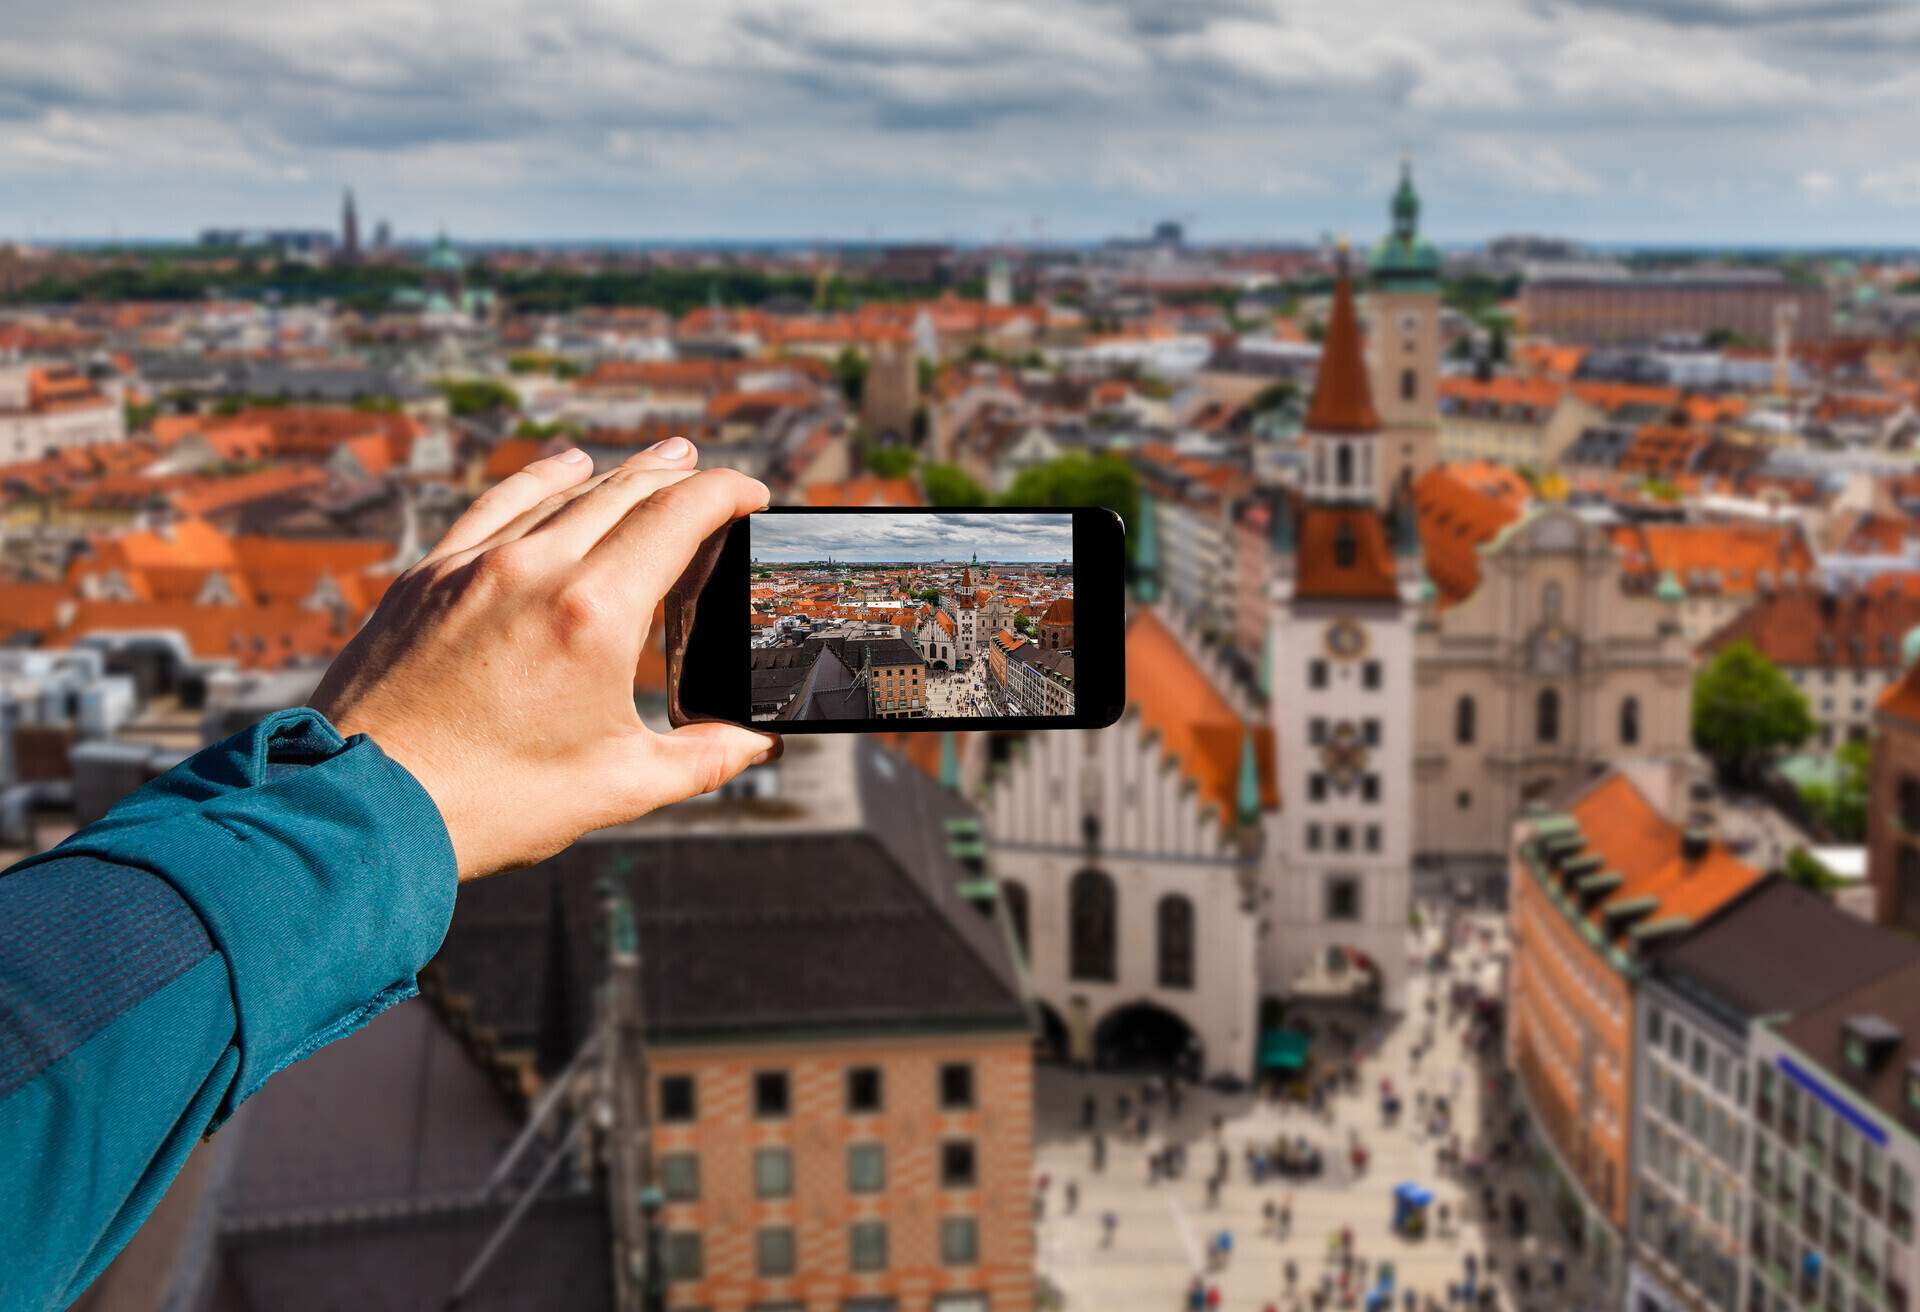 An individual holding a smartphone takes a photo of the old urban cityscape.